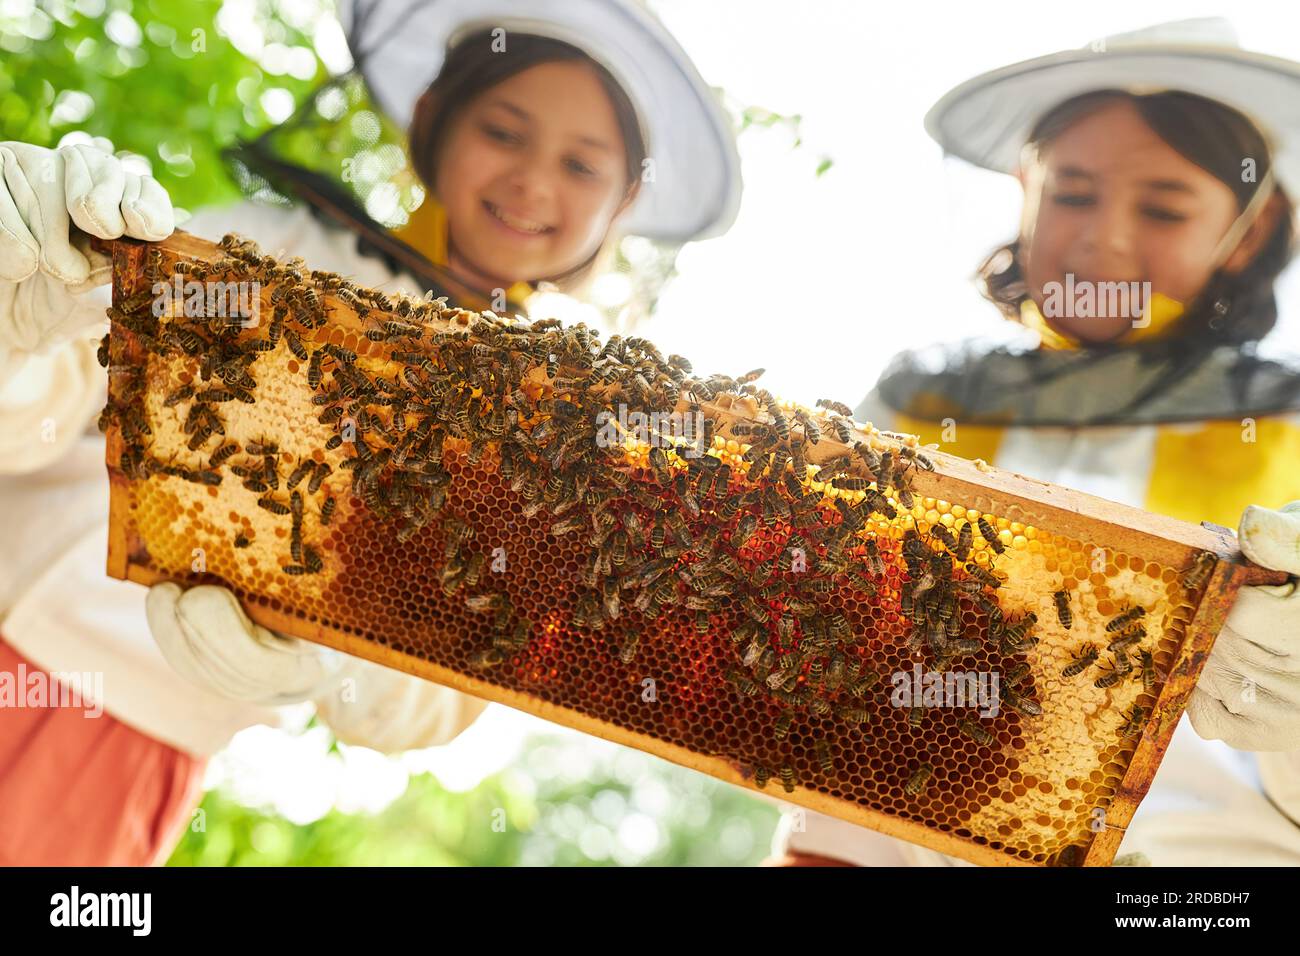 Low angle view of happy girls with honeycomb frame at apiary garden Stock Photo